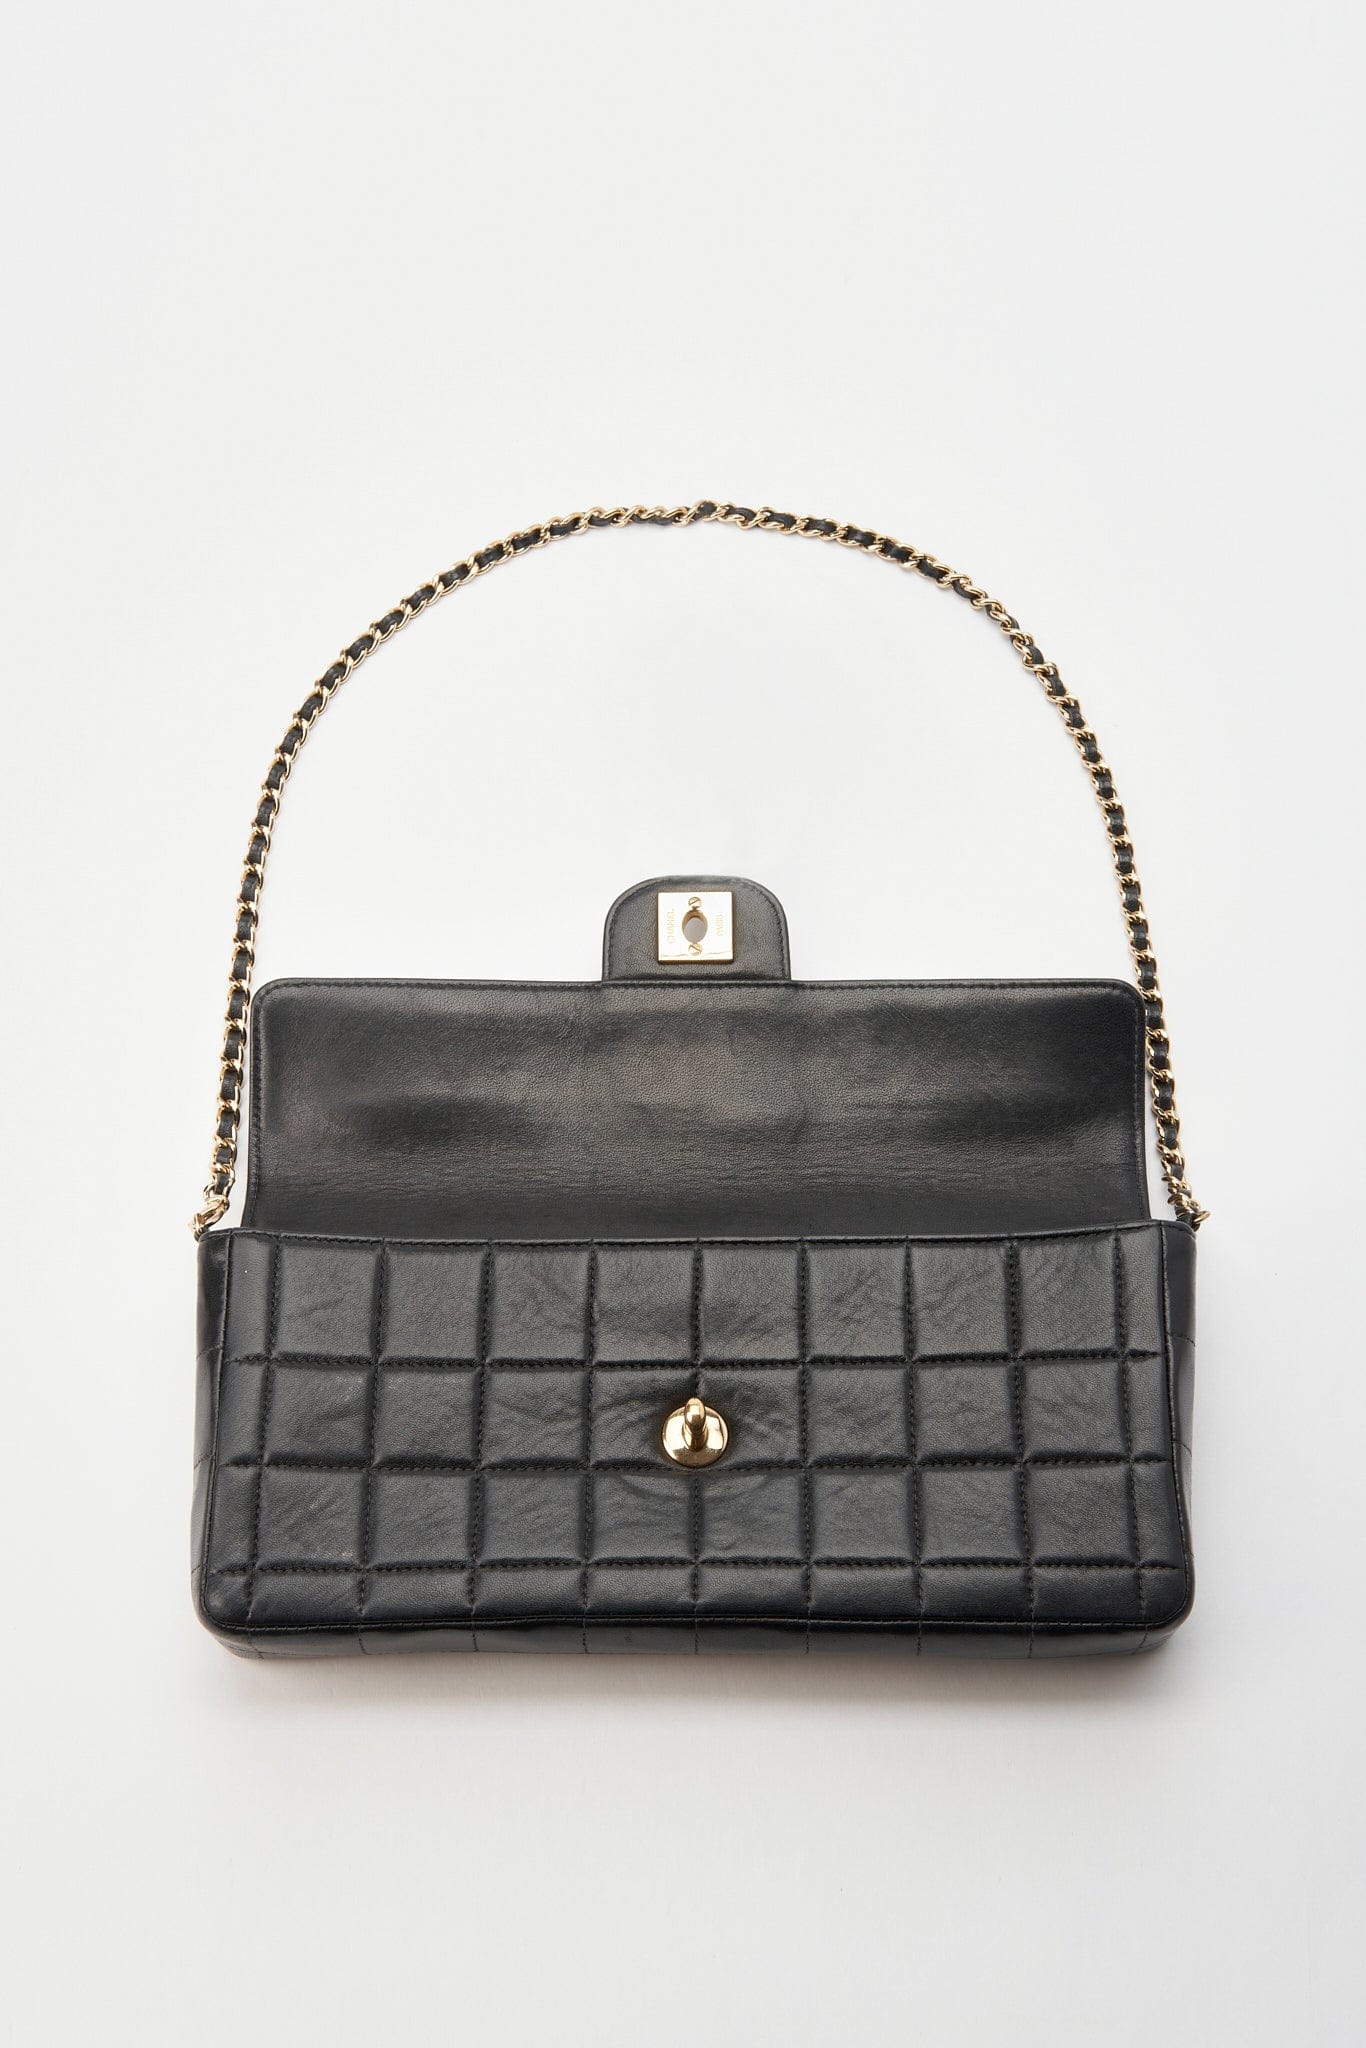 Chanel Black leather Chocolate Bar Flap Bag With 24K Gold Plated Hardware